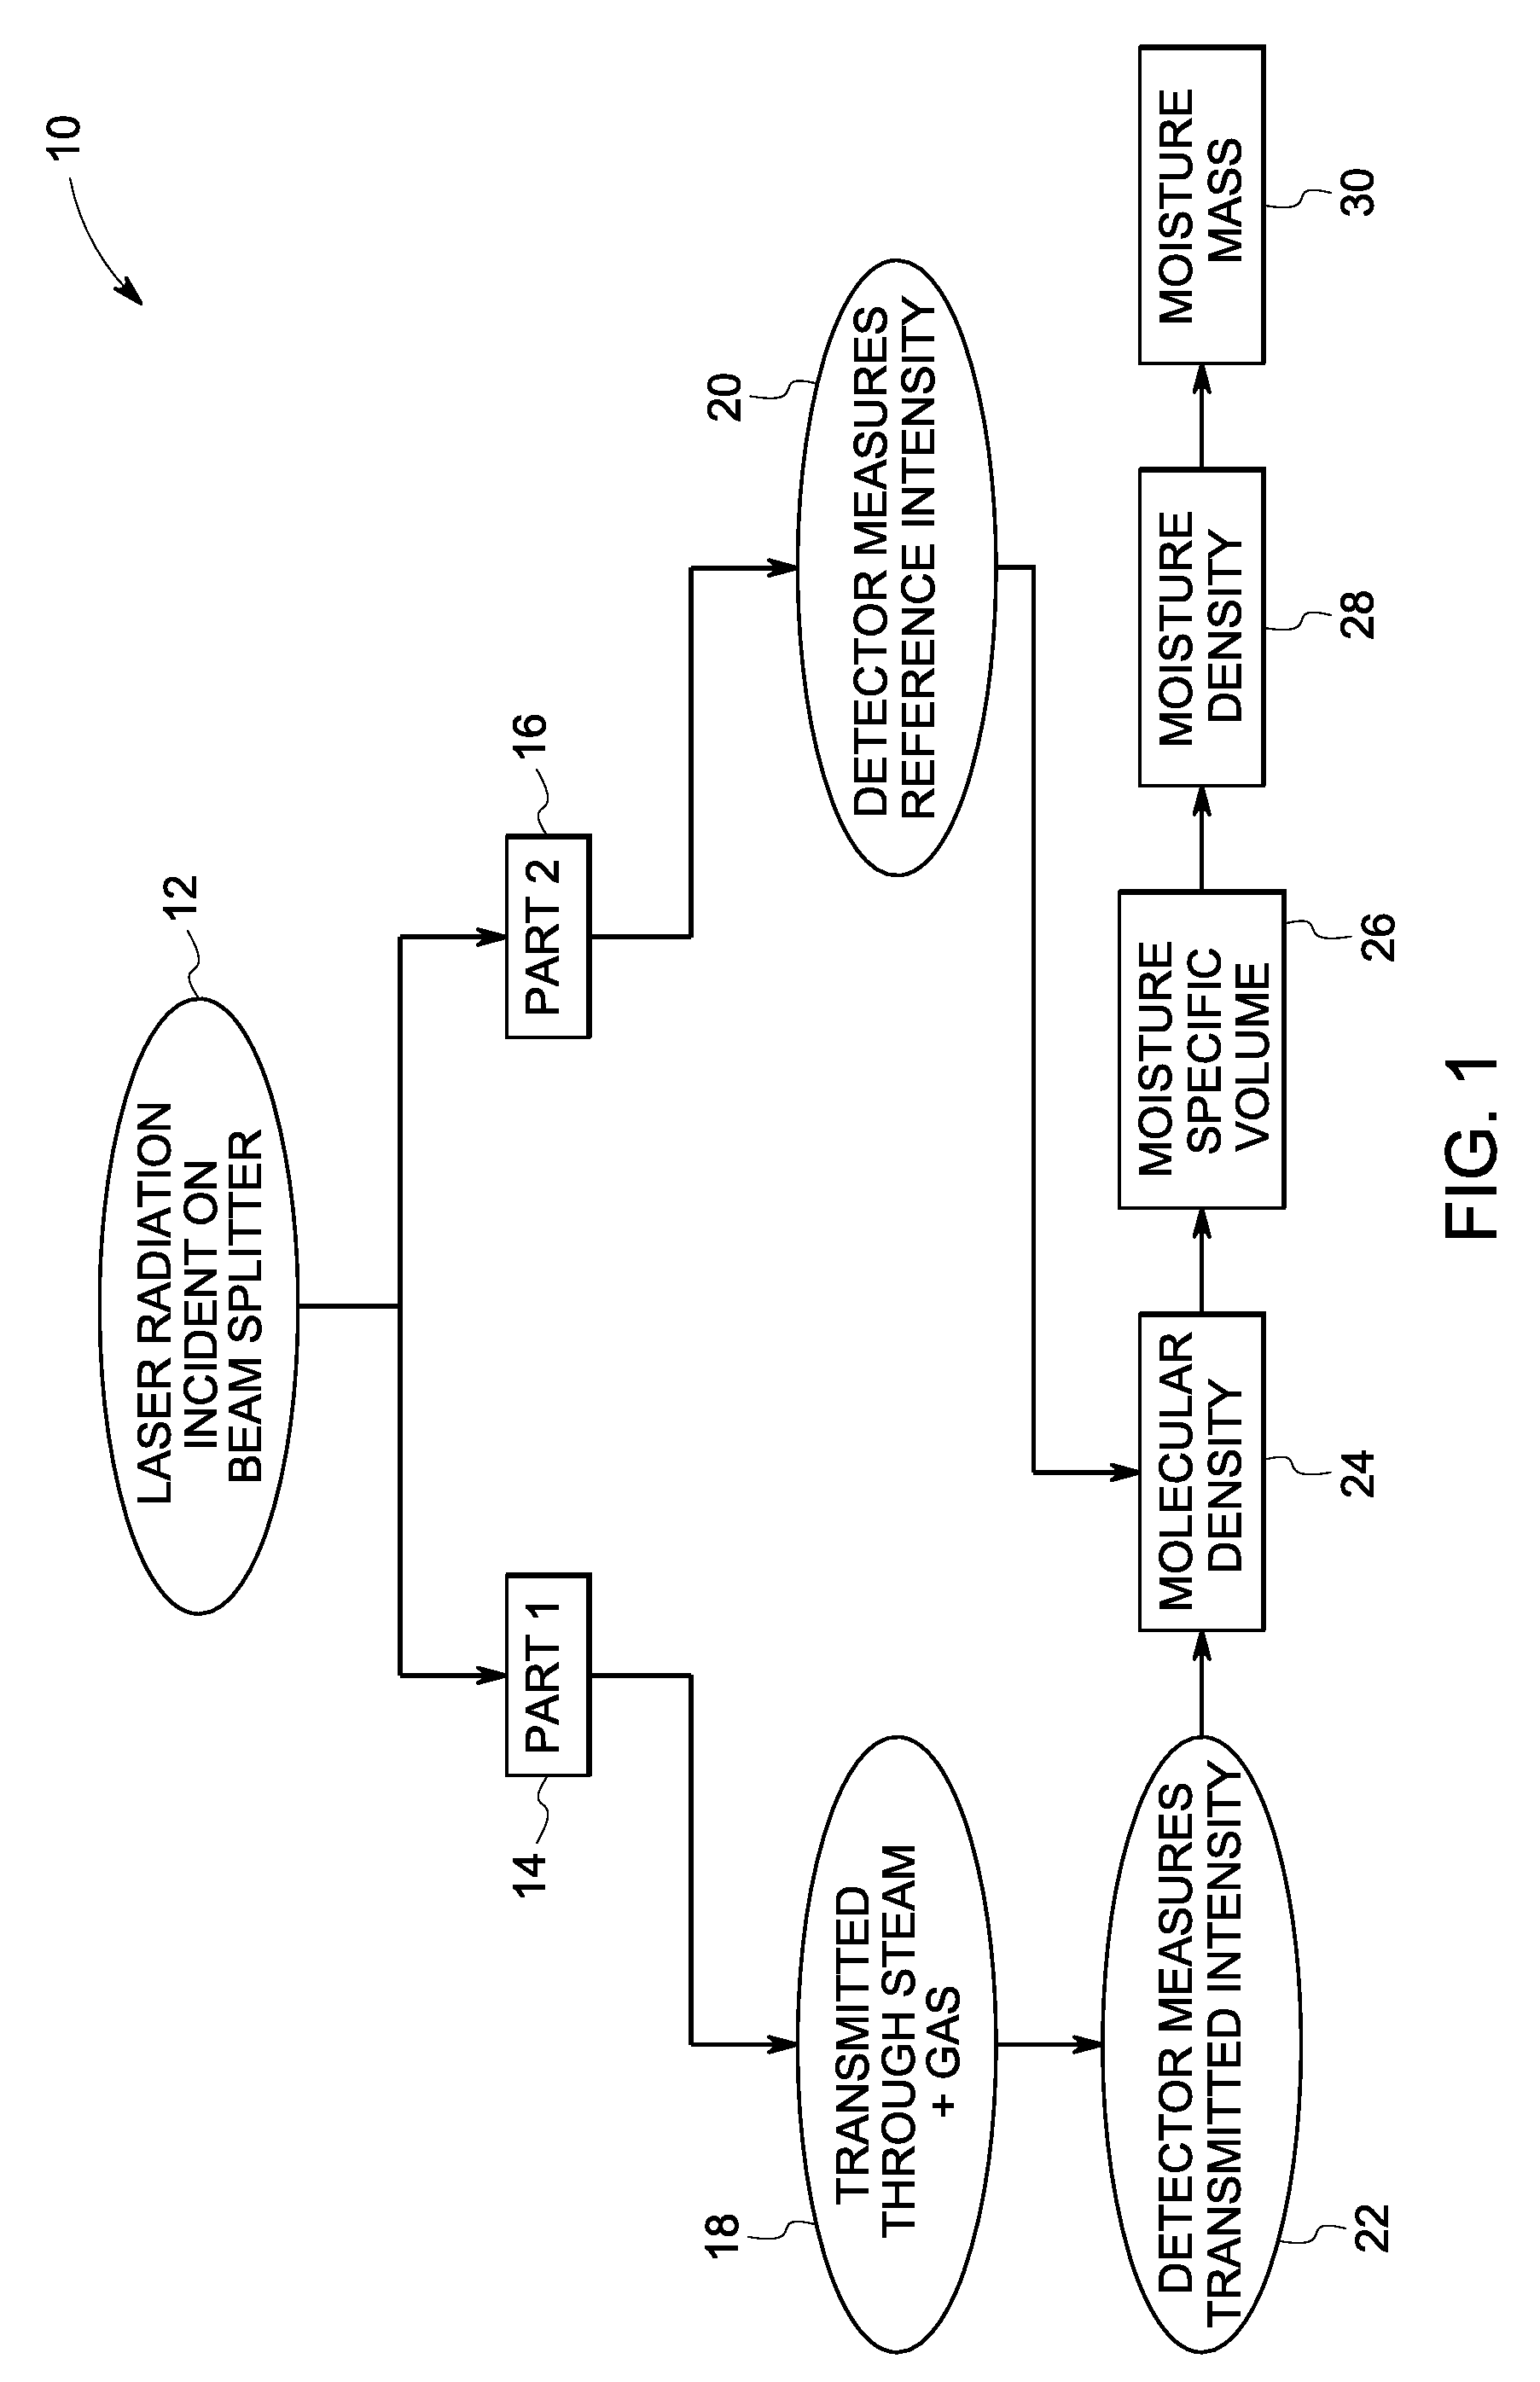 System and method for sensing fuel moisturization